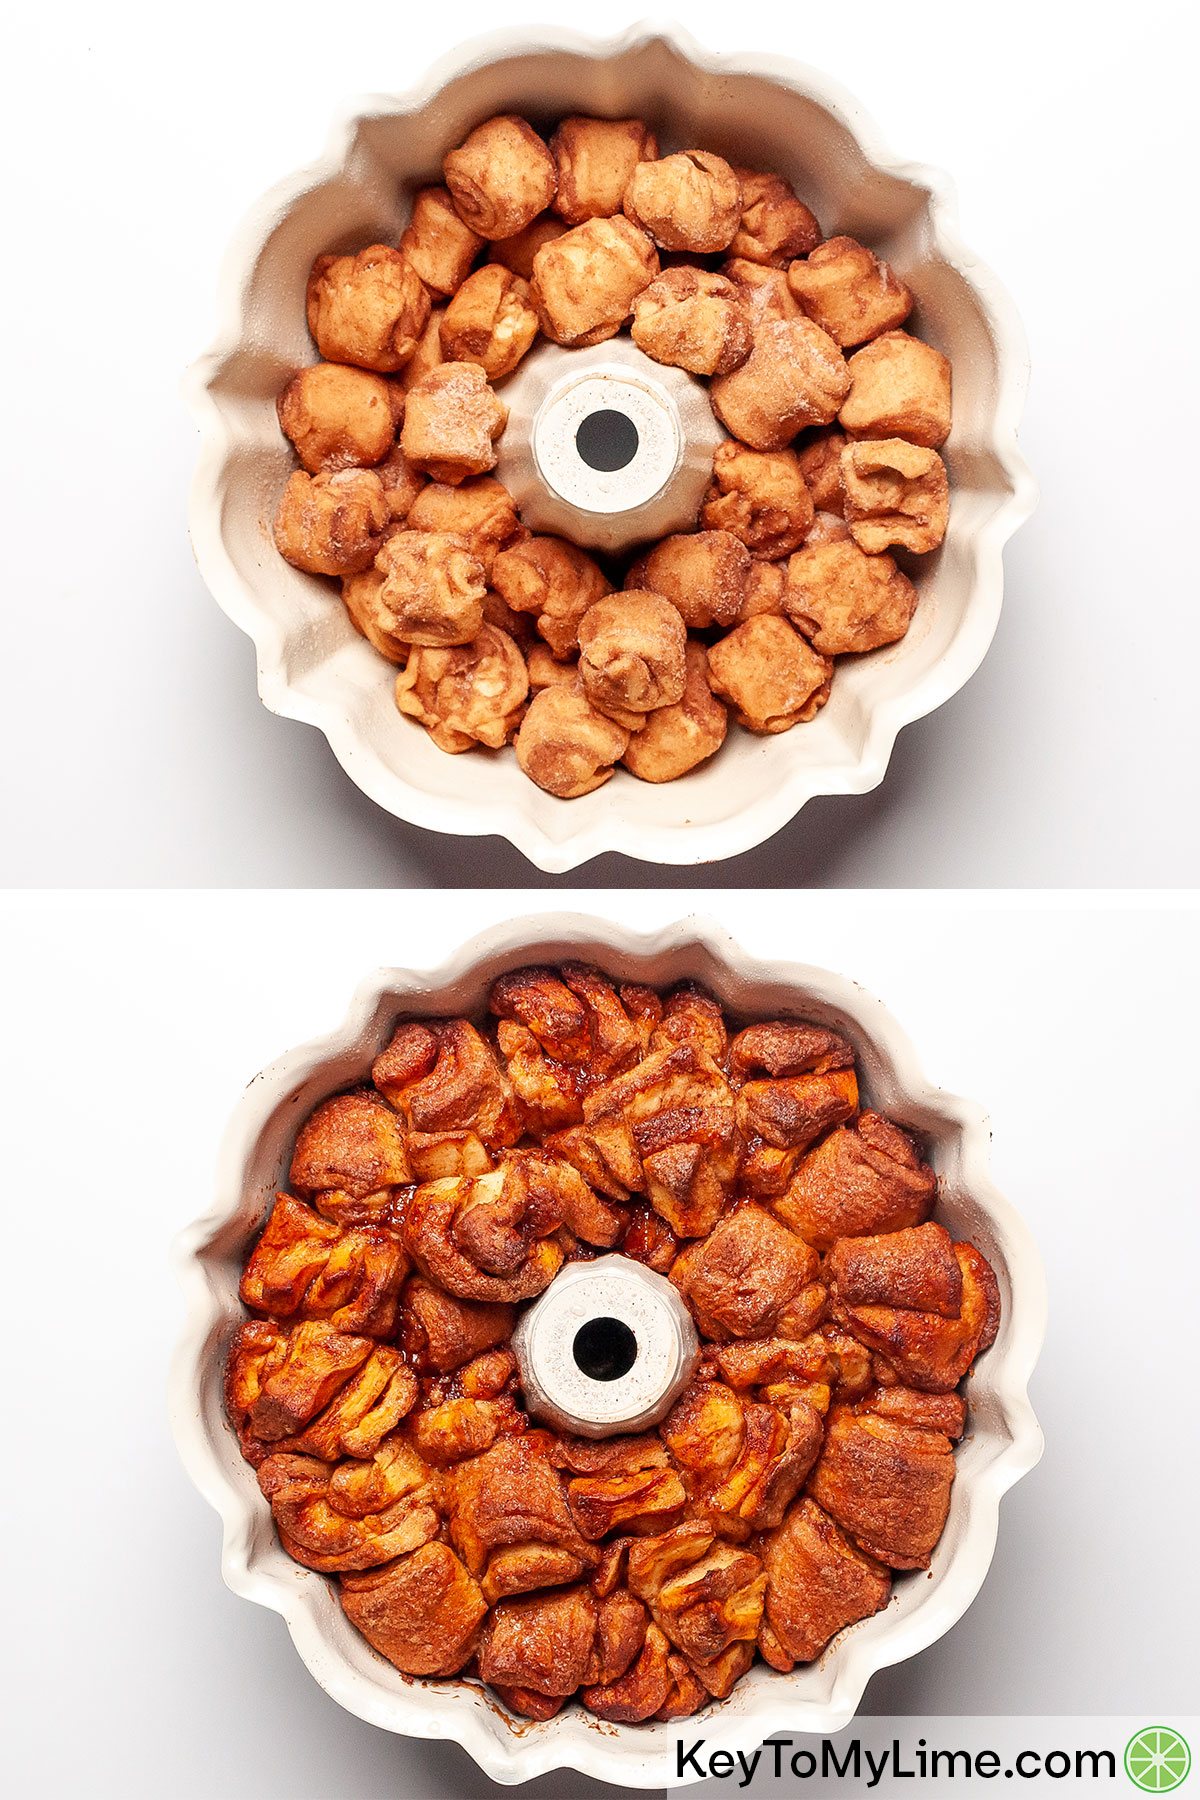 Cinnamon roll monkey bread before and after baking.